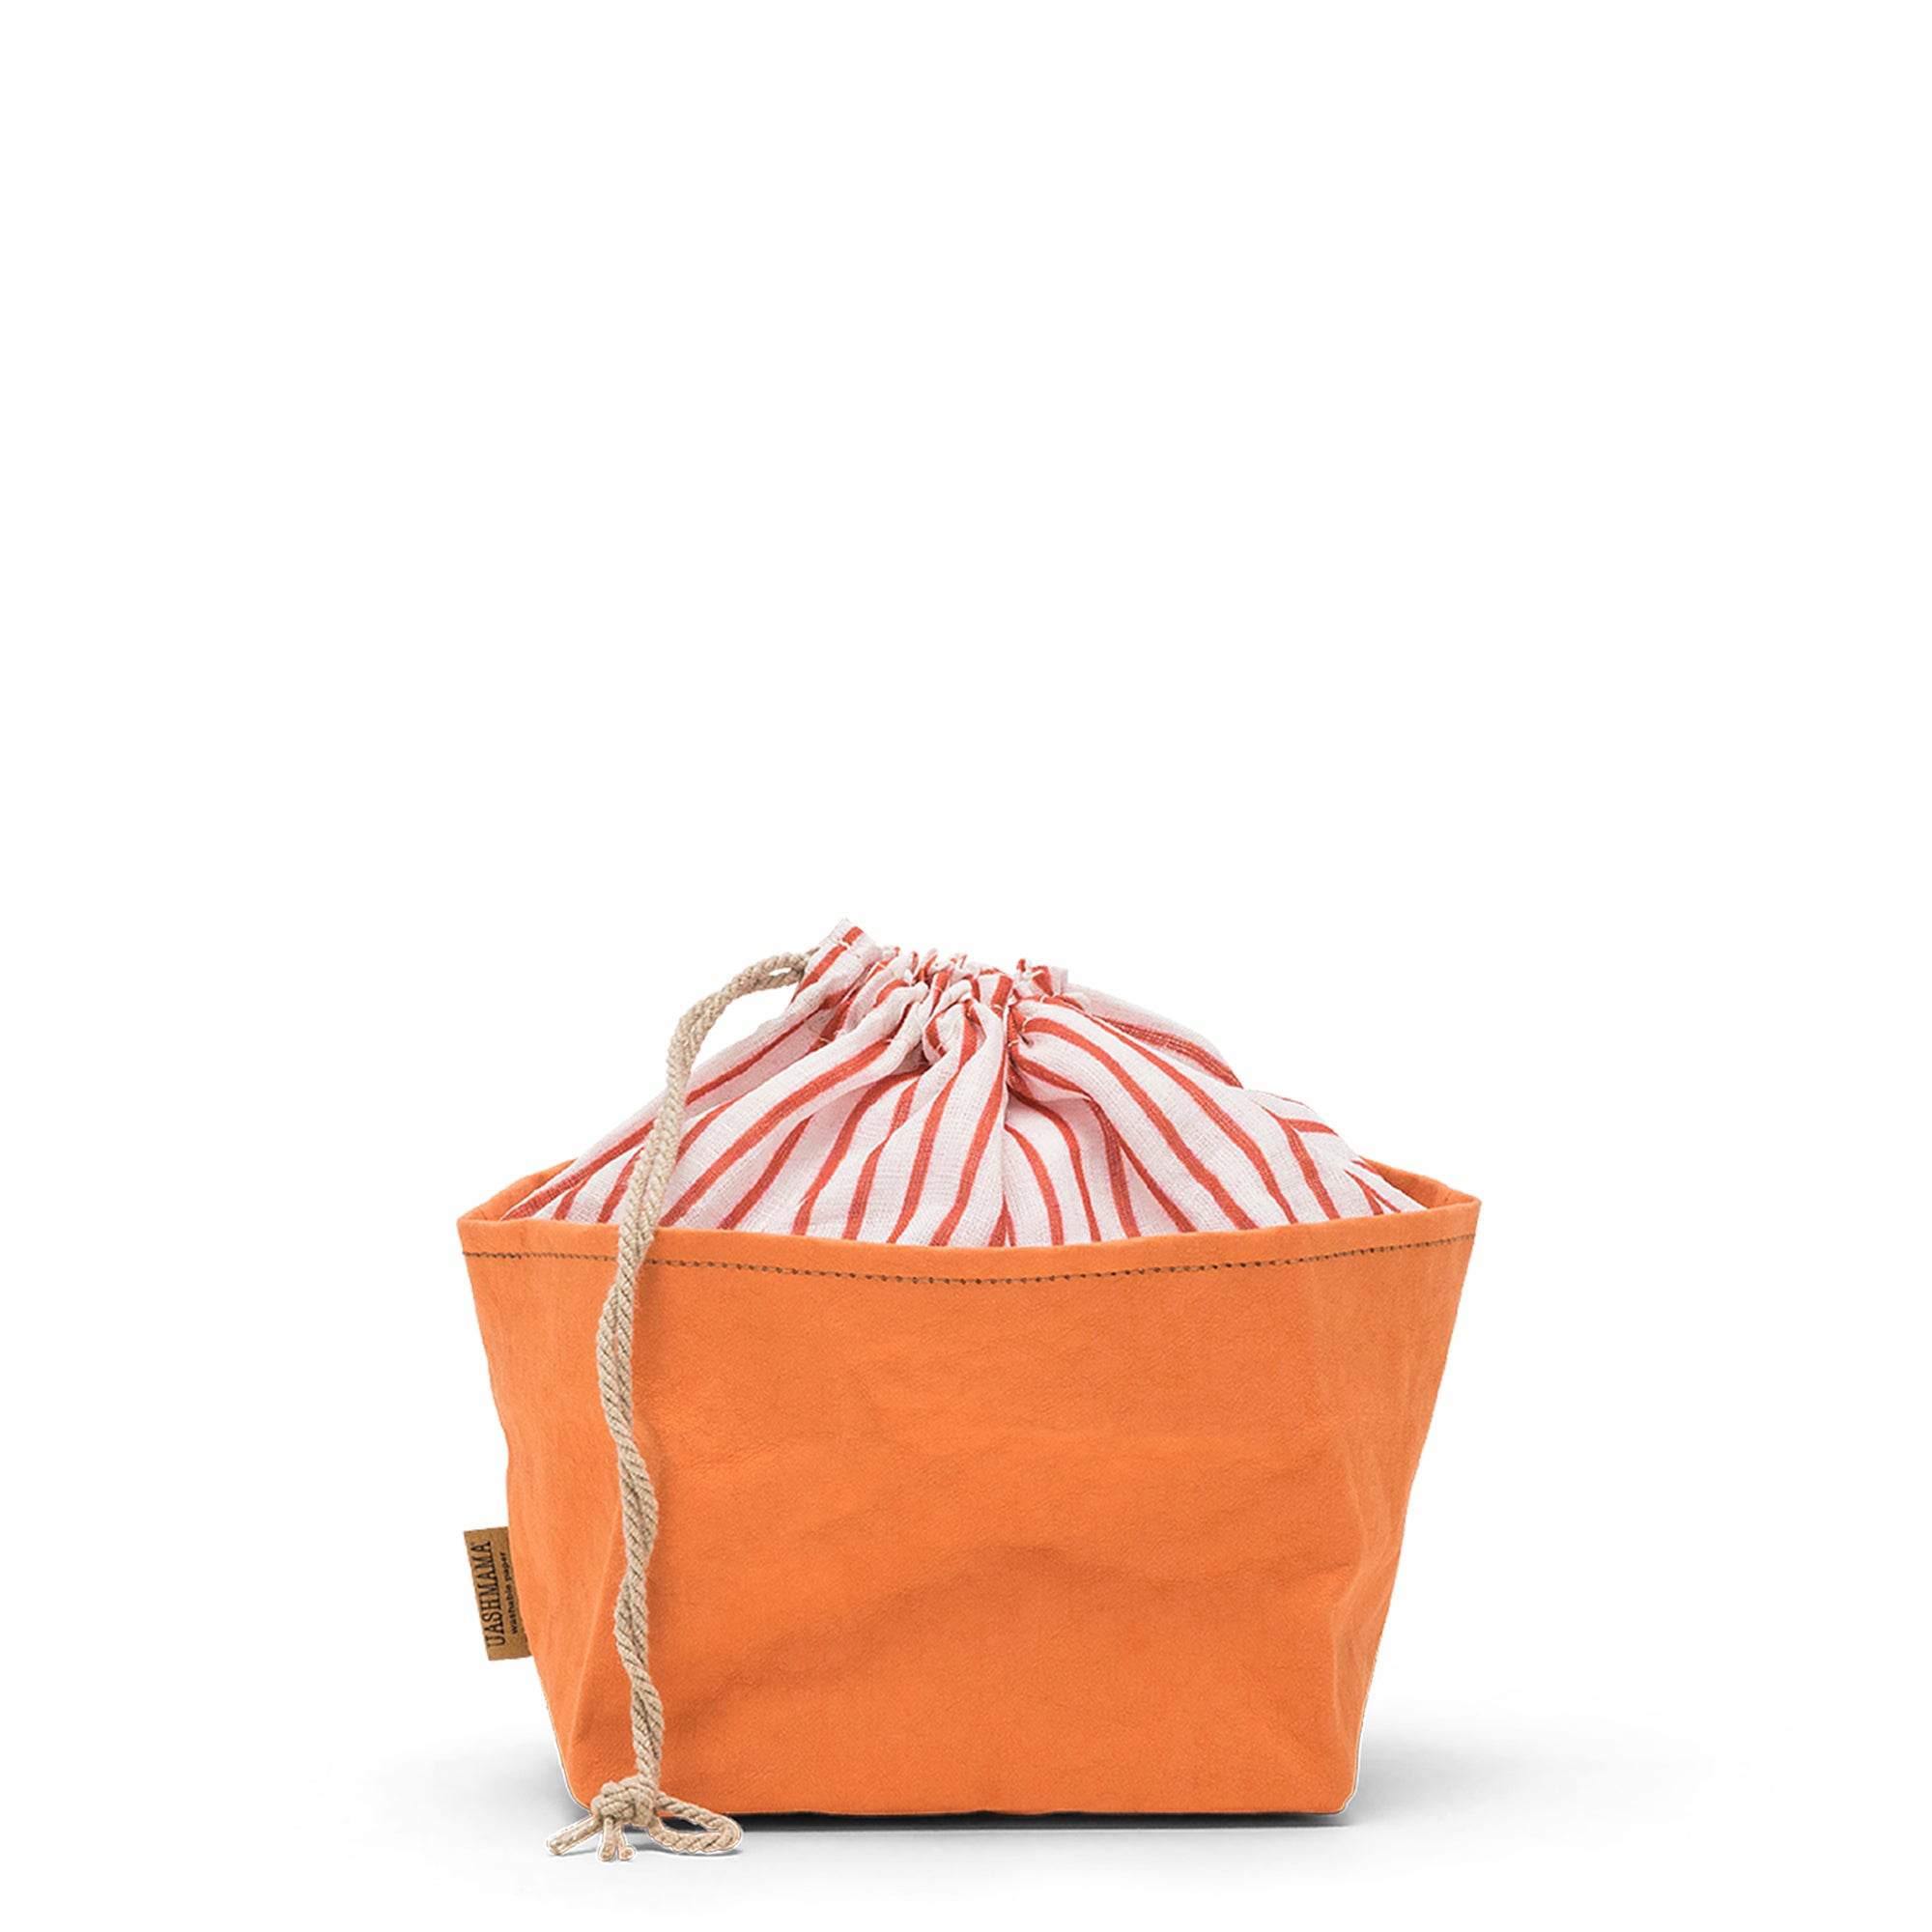 Drawstring Laundry or Storage Bag in Olive Color. Linen and Washable Paper Material